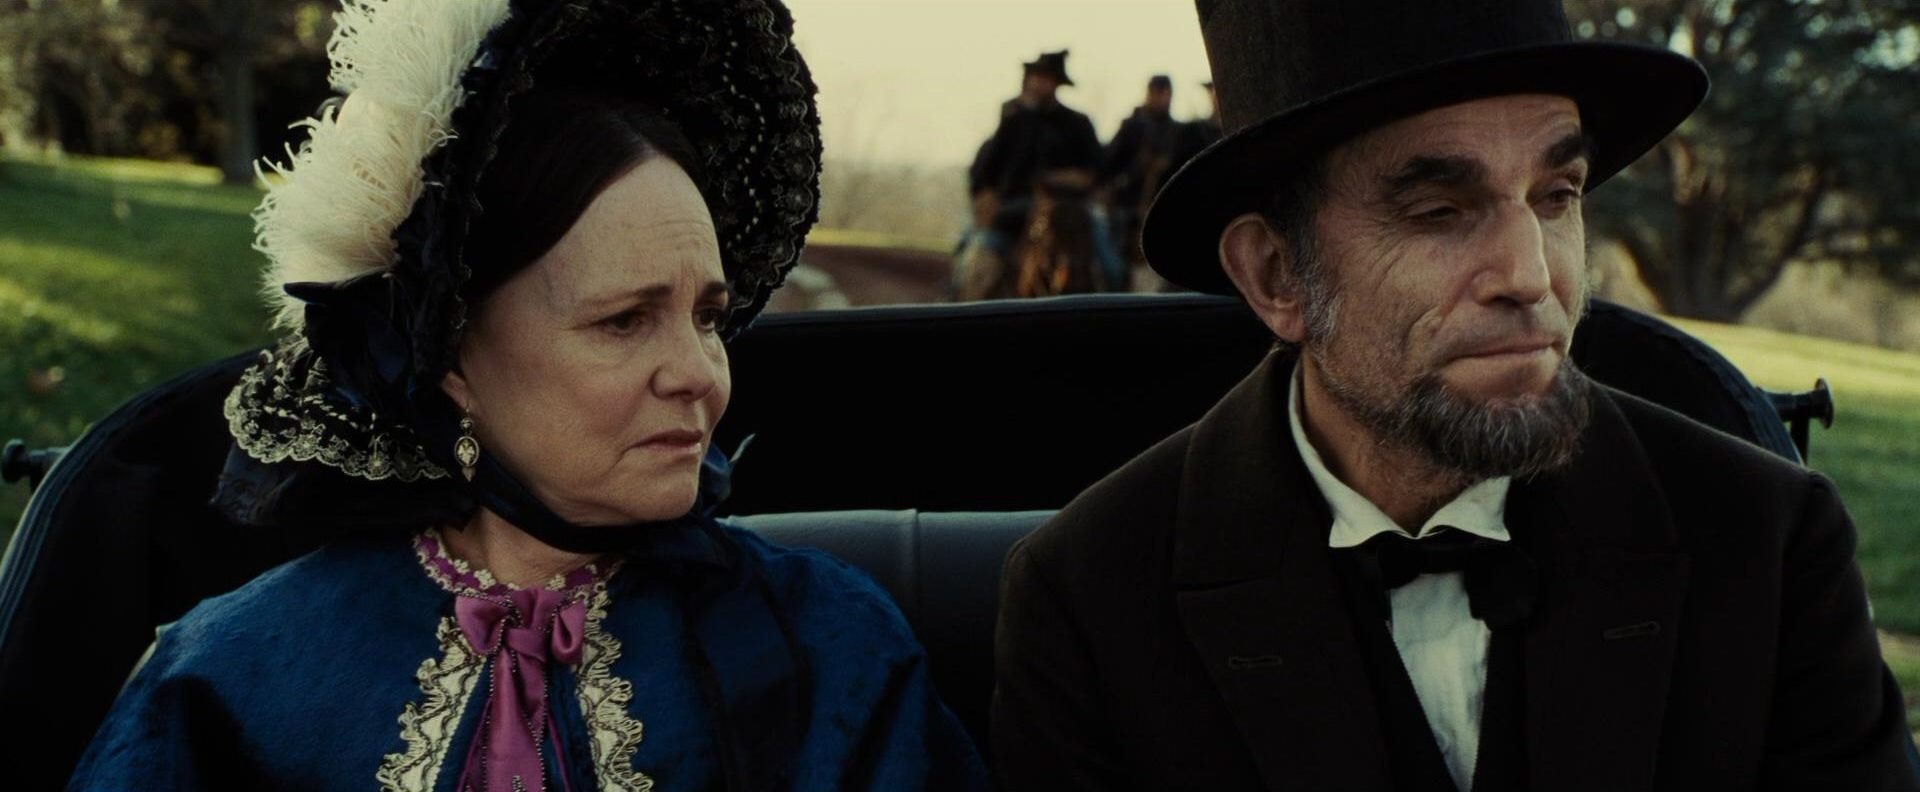 Sally Field and Daniel Day-Lewis in Lincoln (2012)